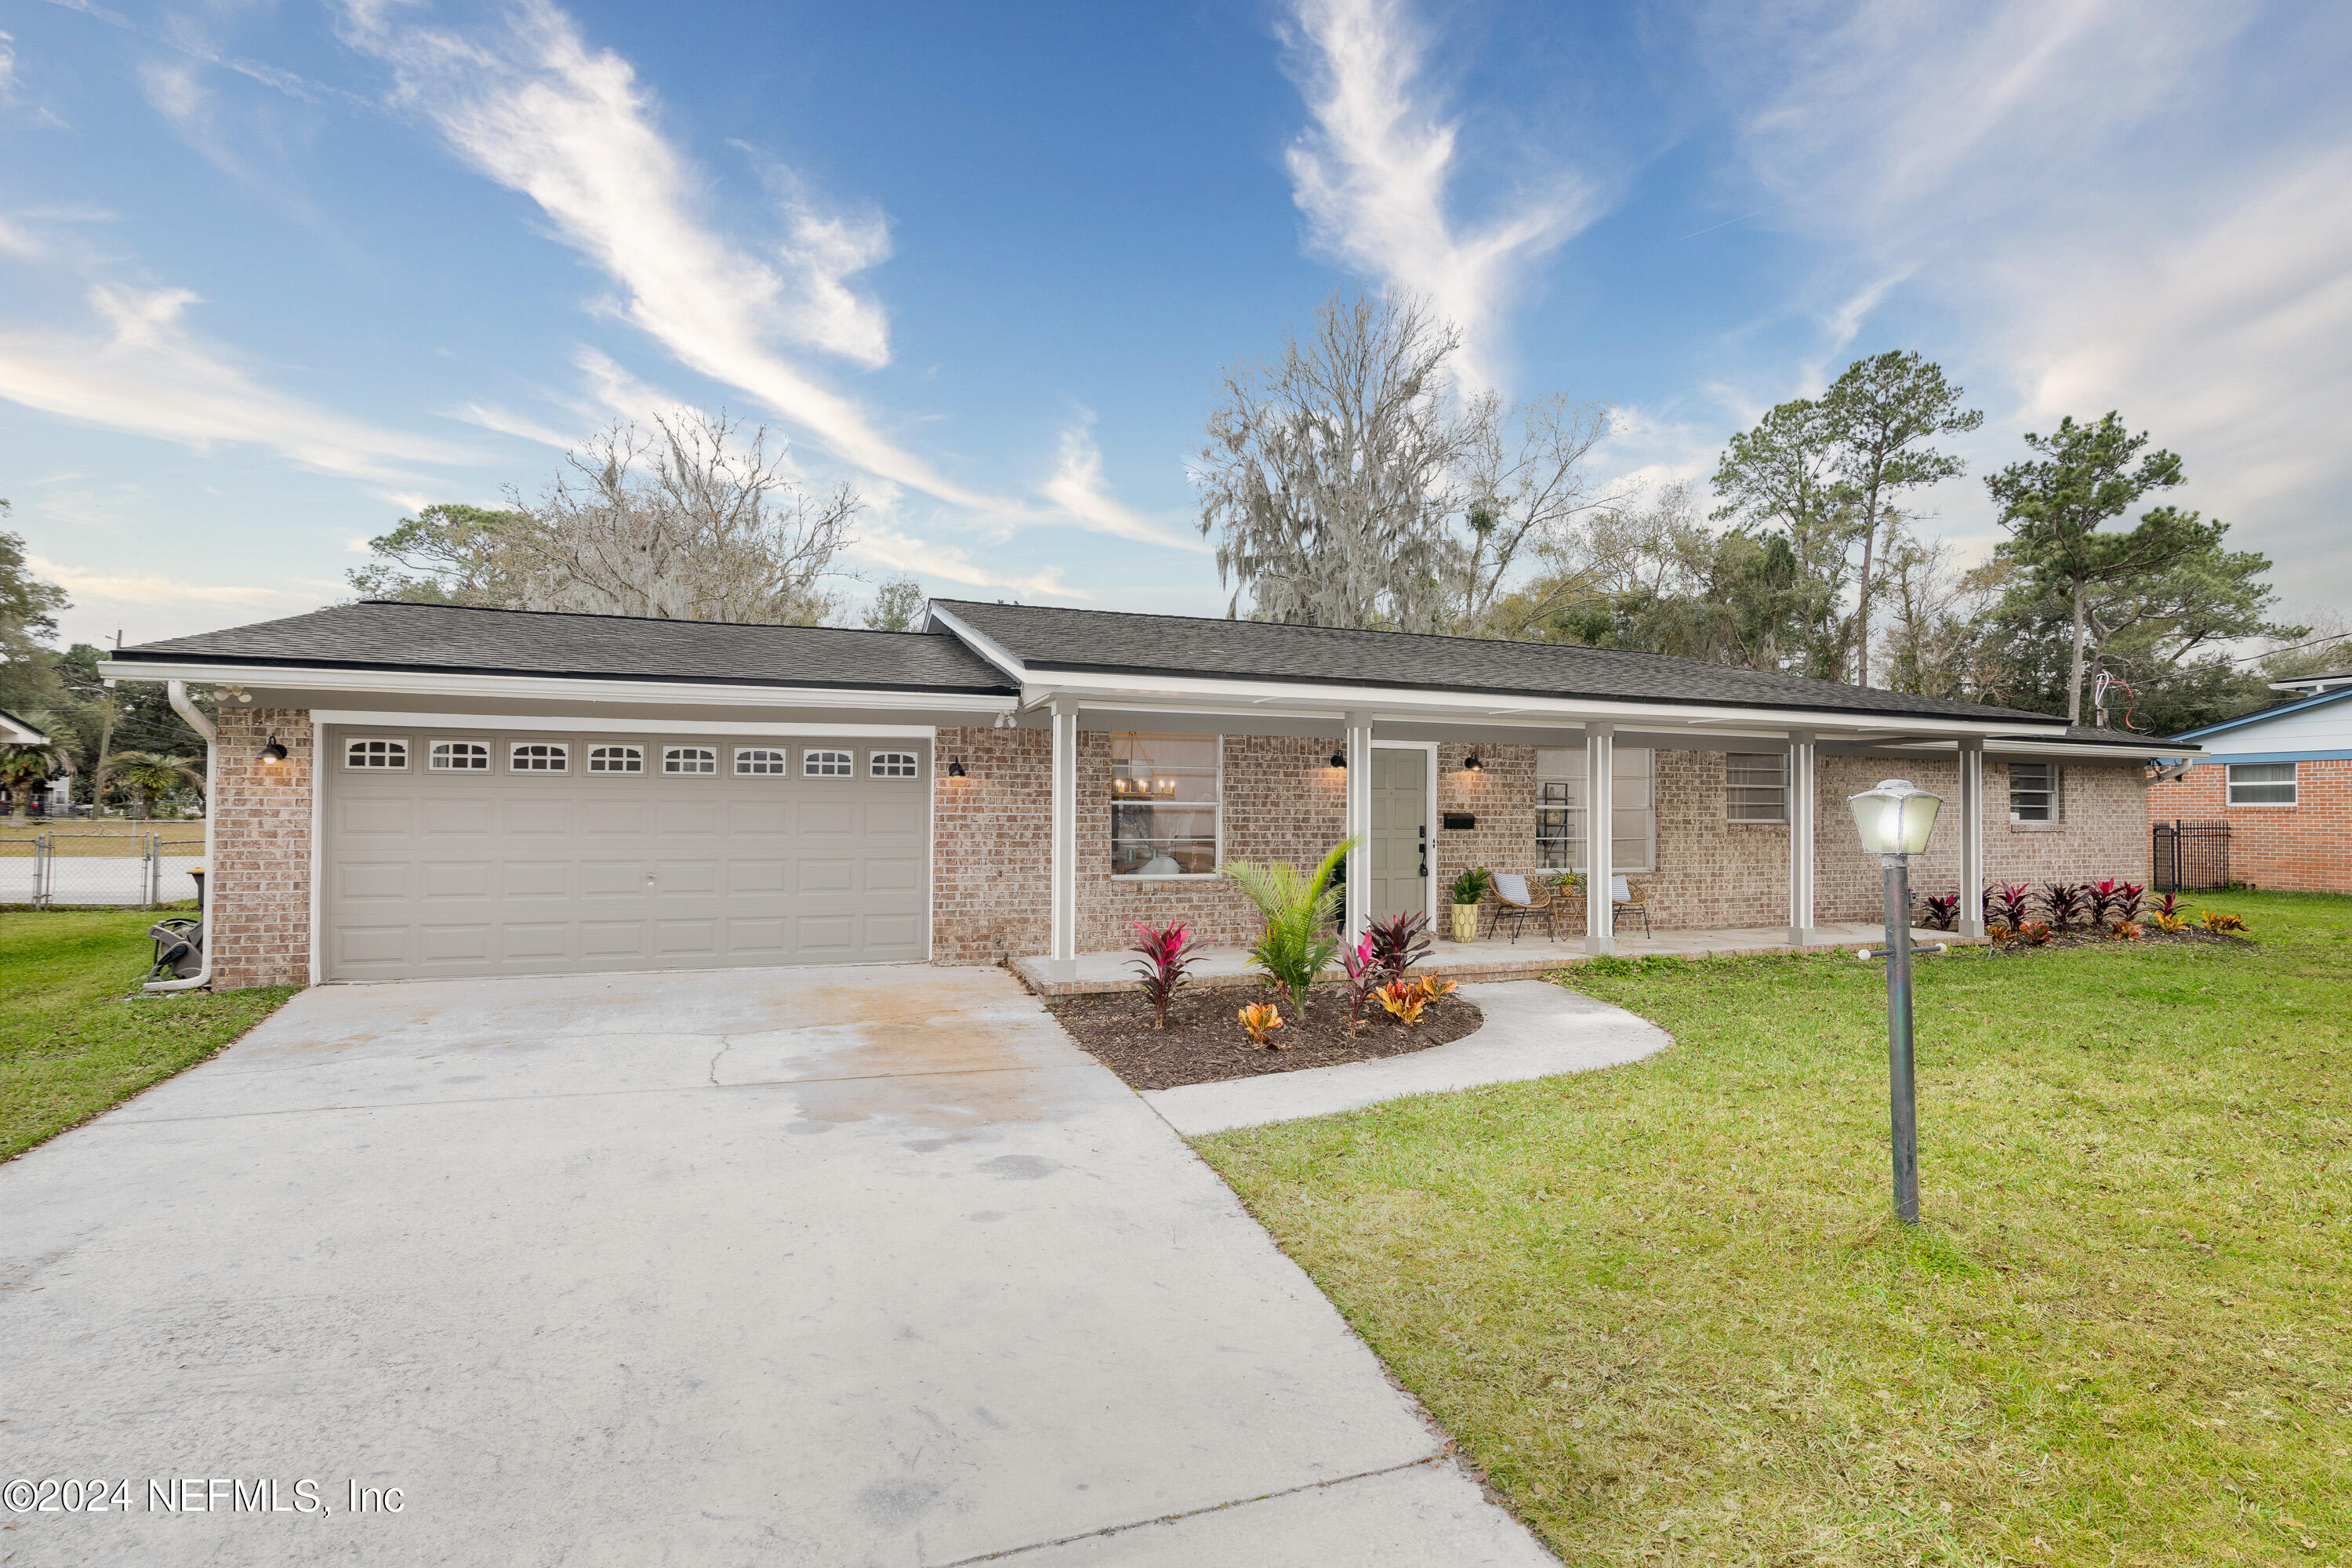 Jacksonville, FL home for sale located at 6820 HYDE GROVE Avenue, Jacksonville, FL 32210